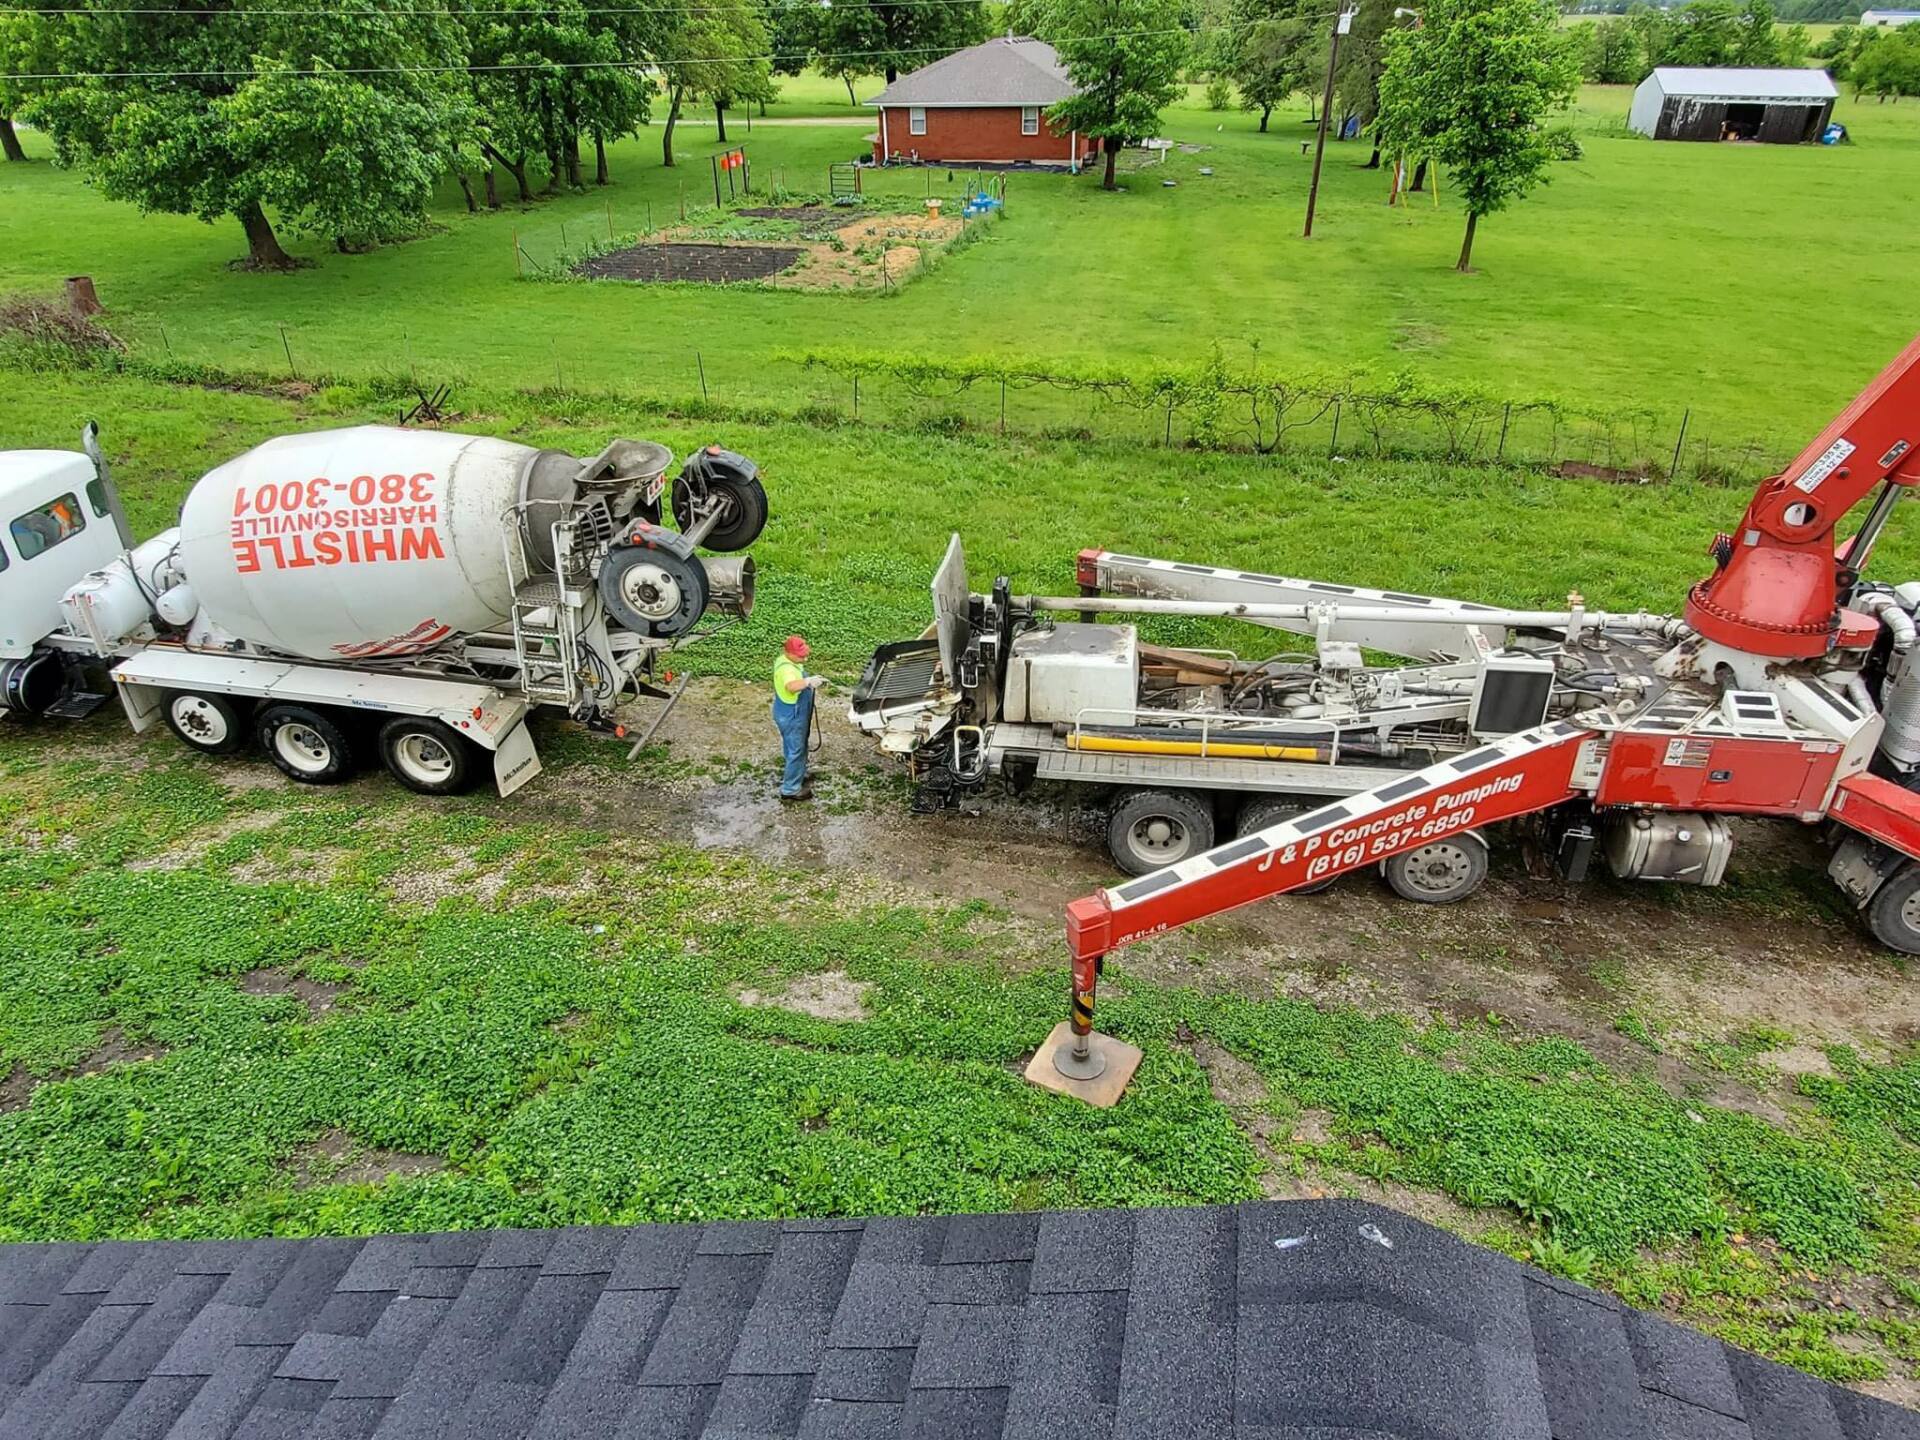 A truck completing a ready-mixed concrete delivery to a property in Lee's Summit, MO